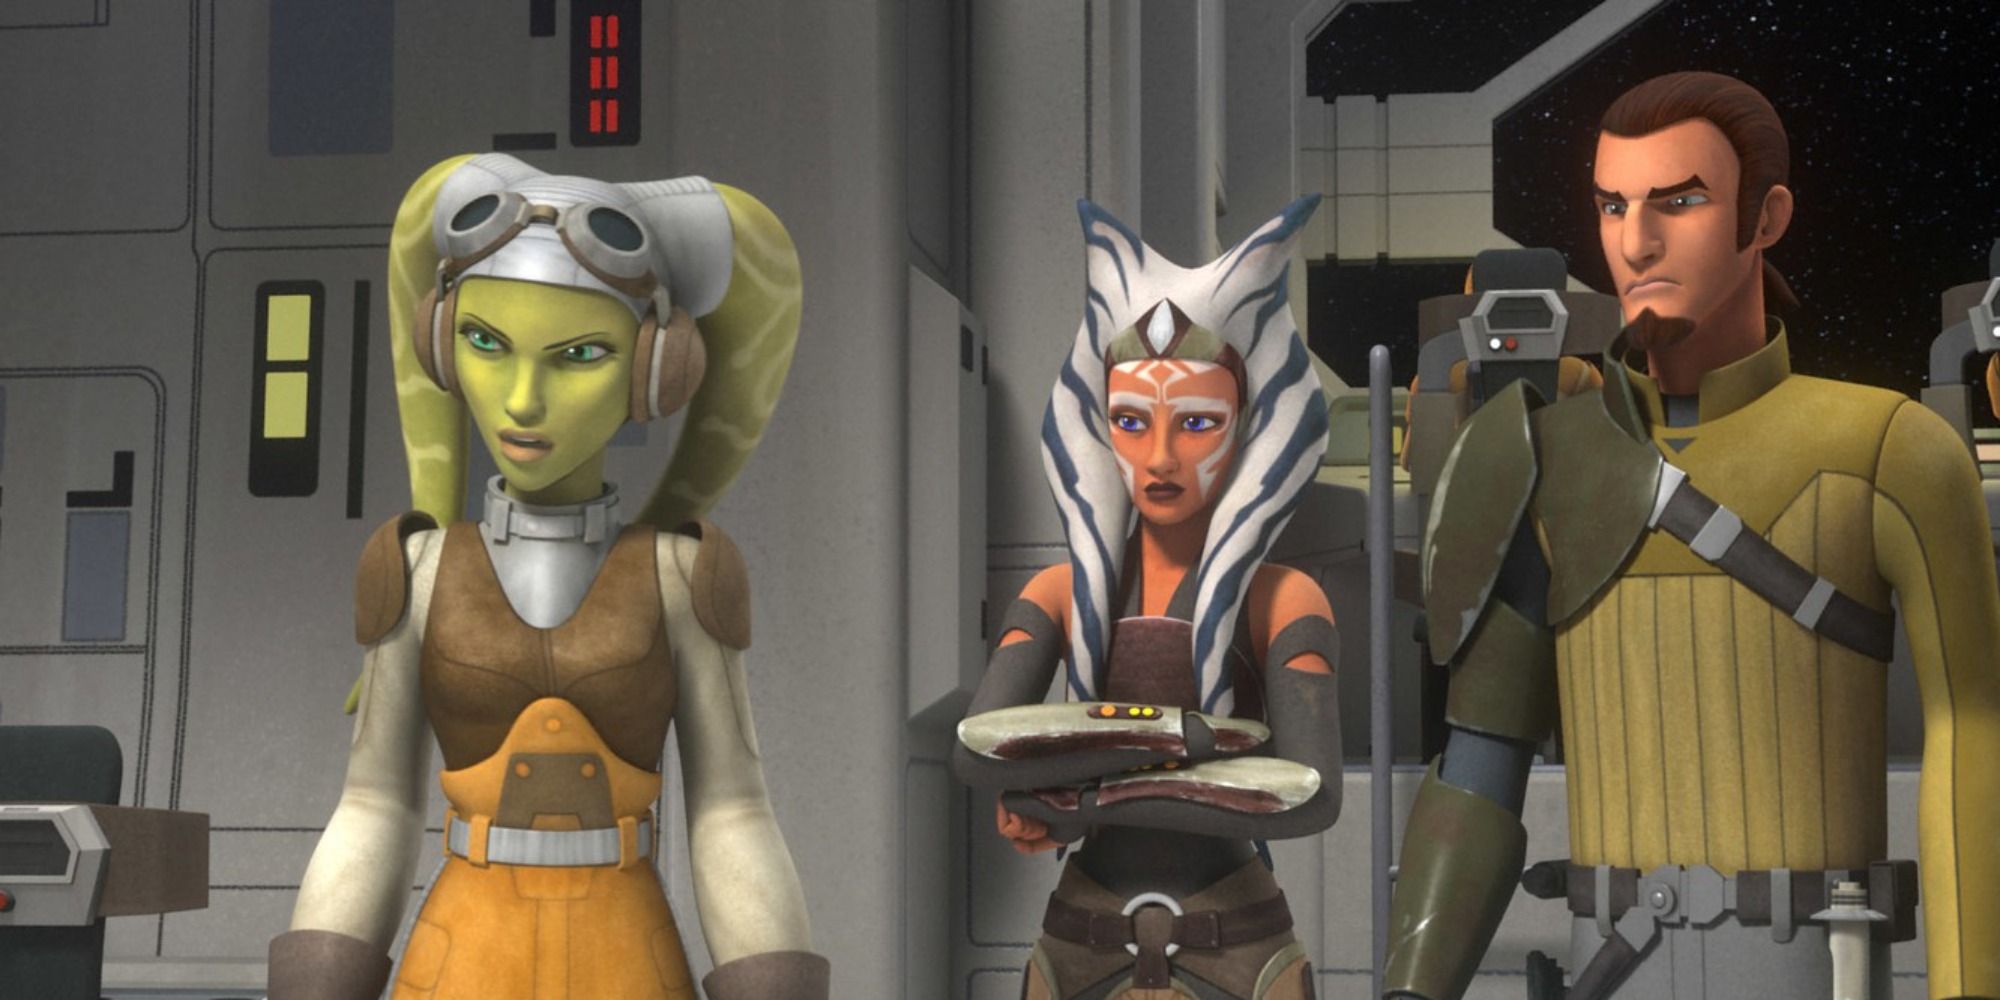 Ahsoka Tano Hera Syndulla and Kanan Jarrus aboard the main rebel ship discussing plans for the Reel Alliance in Star Wars Rebels